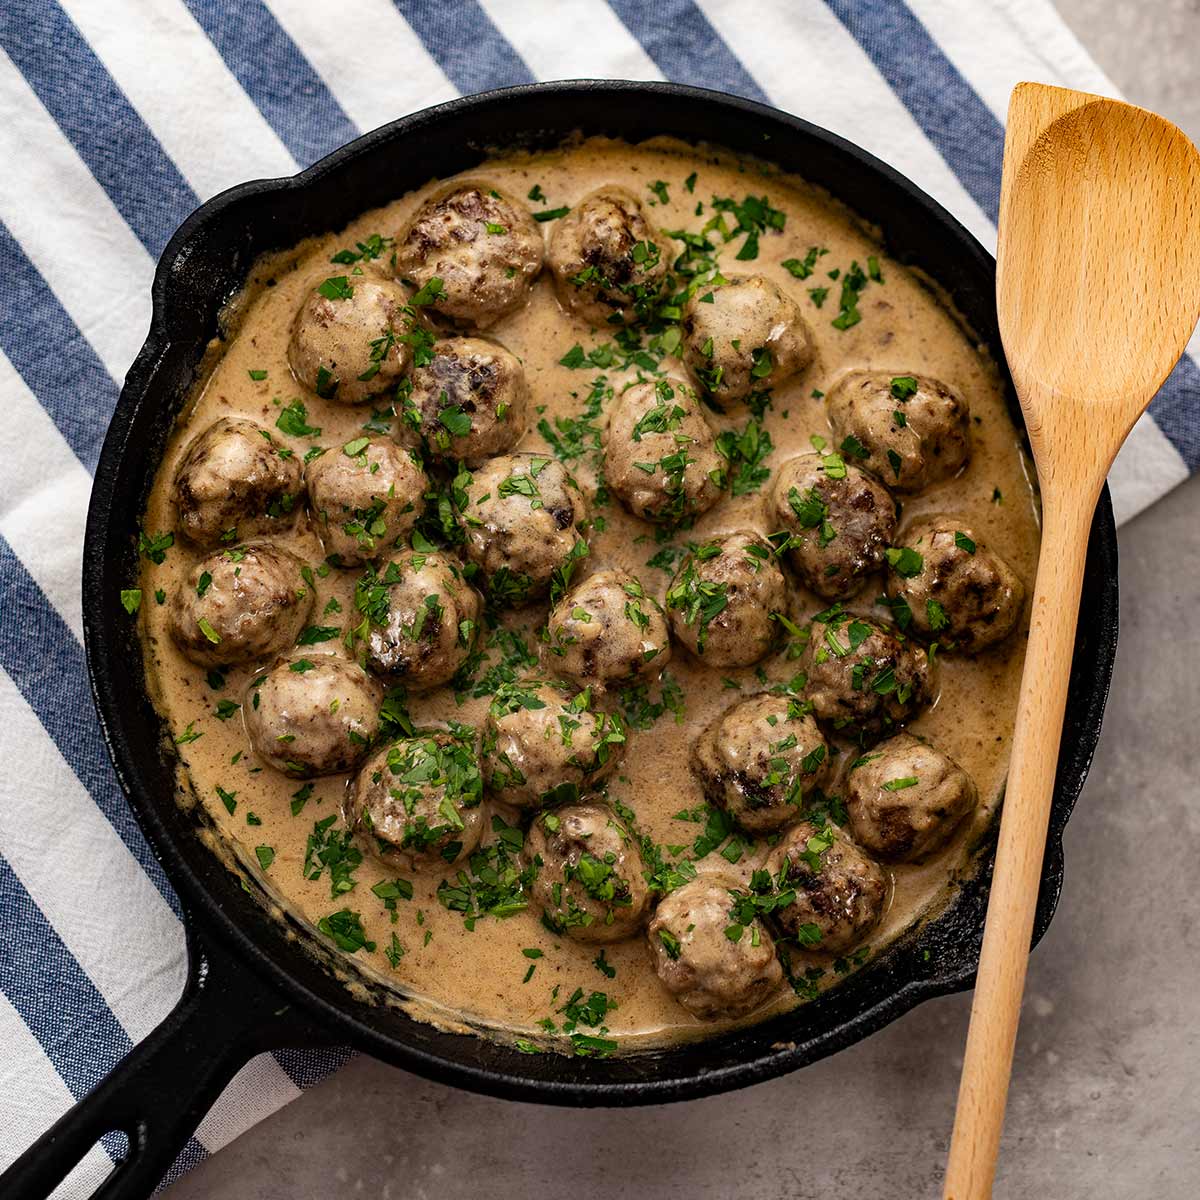 Keto Swedish meatballs in a cast iron skillet on a blue stipe tea towel and a wooden spoon.